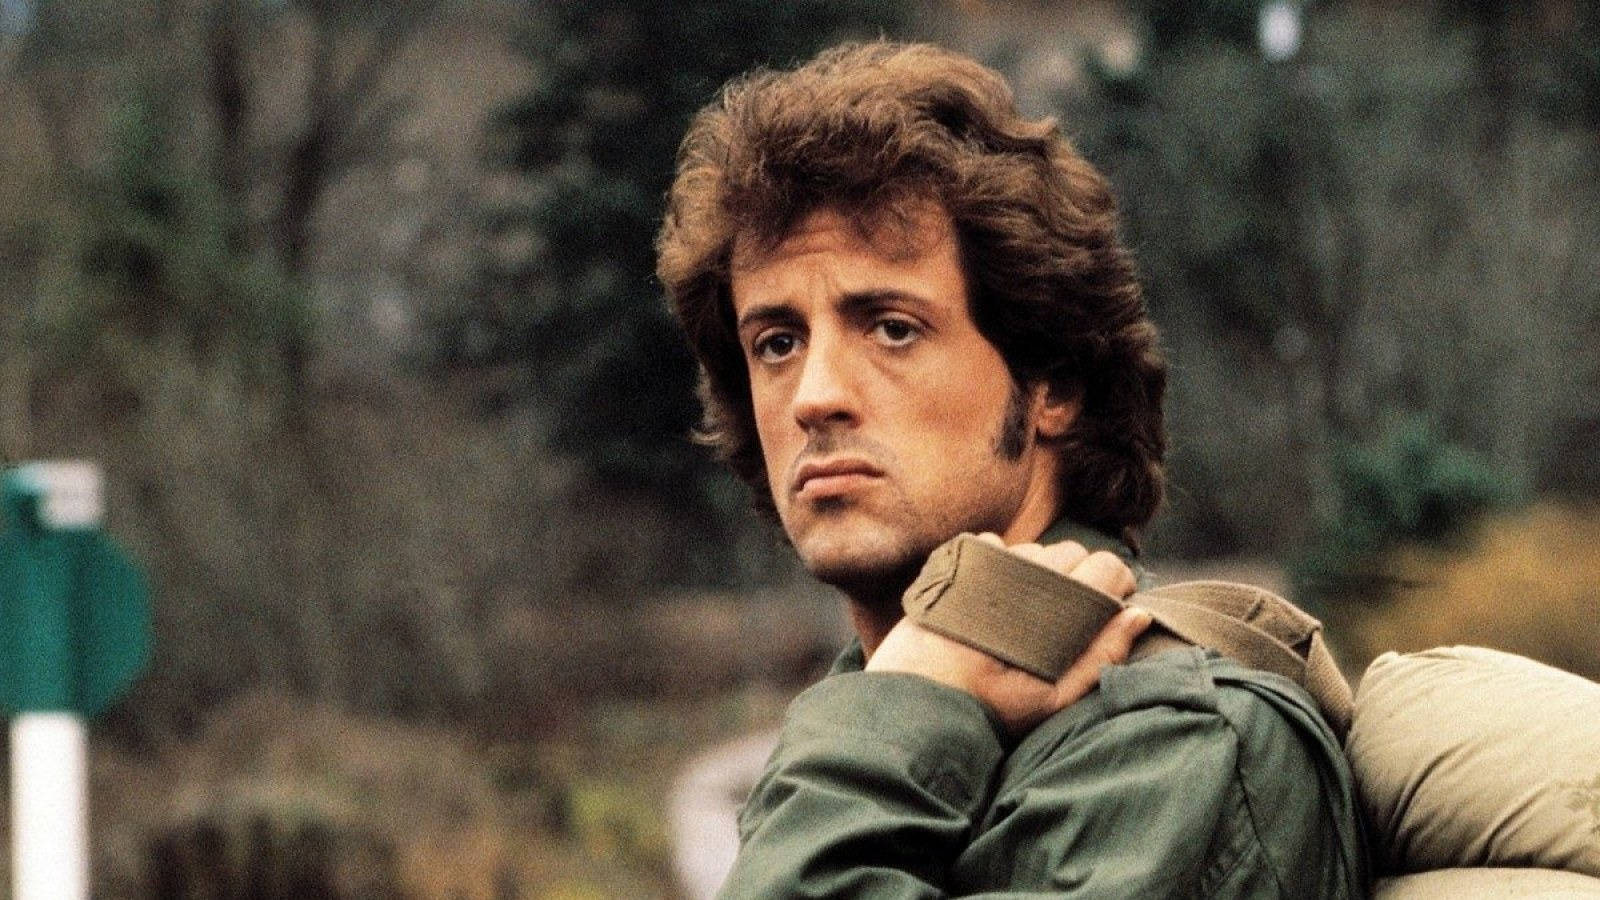 Pioneering Action Hero, Sylvester Stallone In 